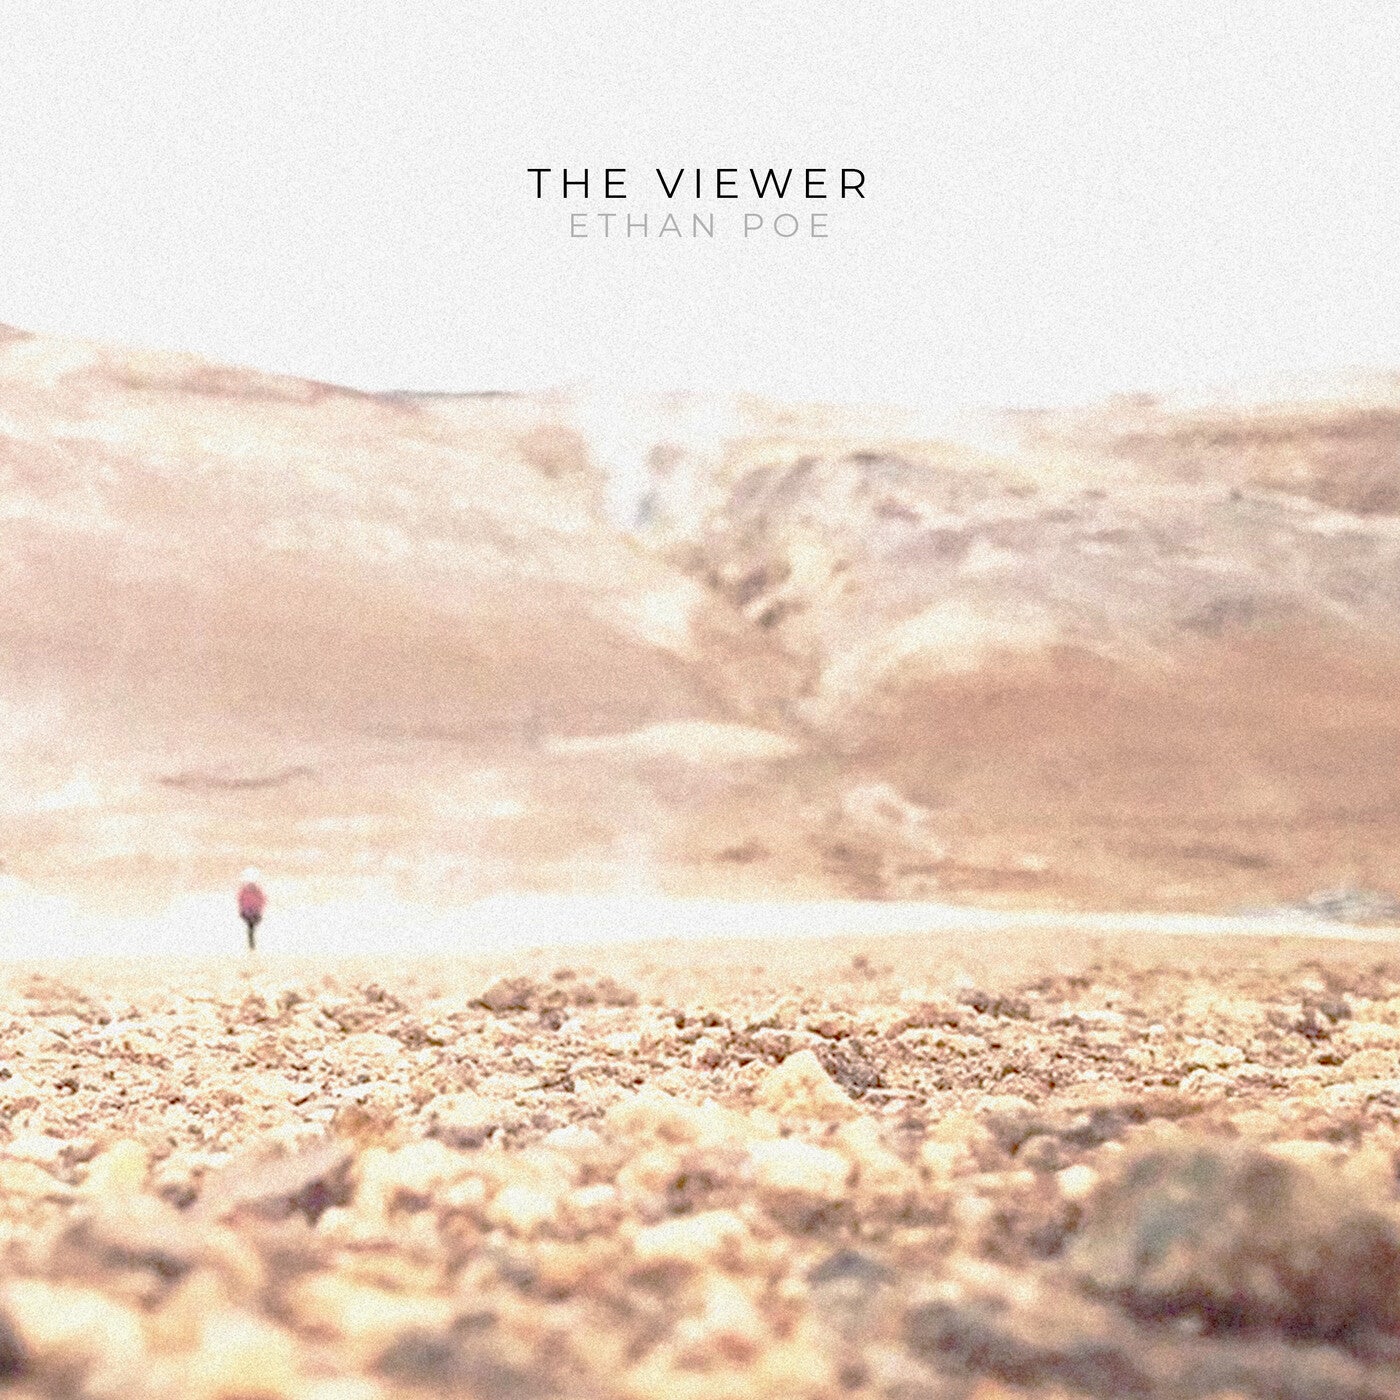 The Viewer